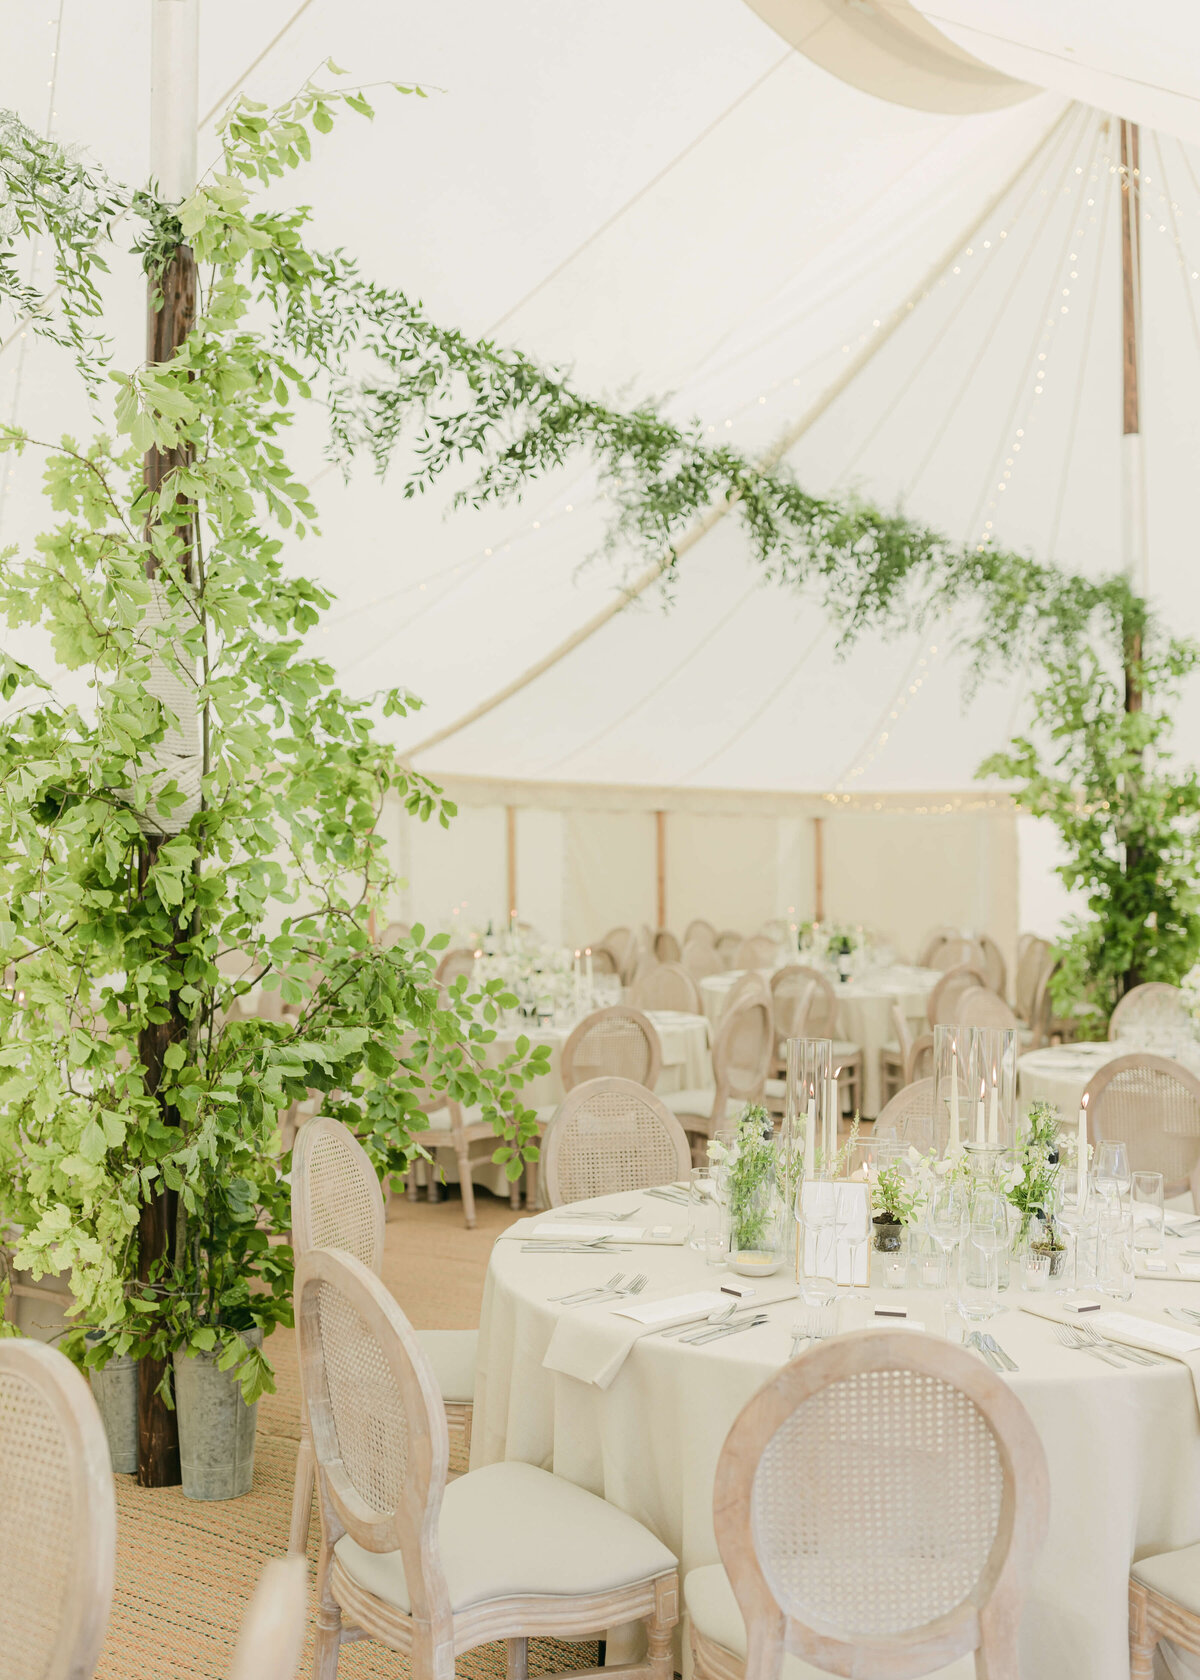 chloe-winstanley-weddings-cotswolds-cornwell-manor-sailcloth-tent-foliage